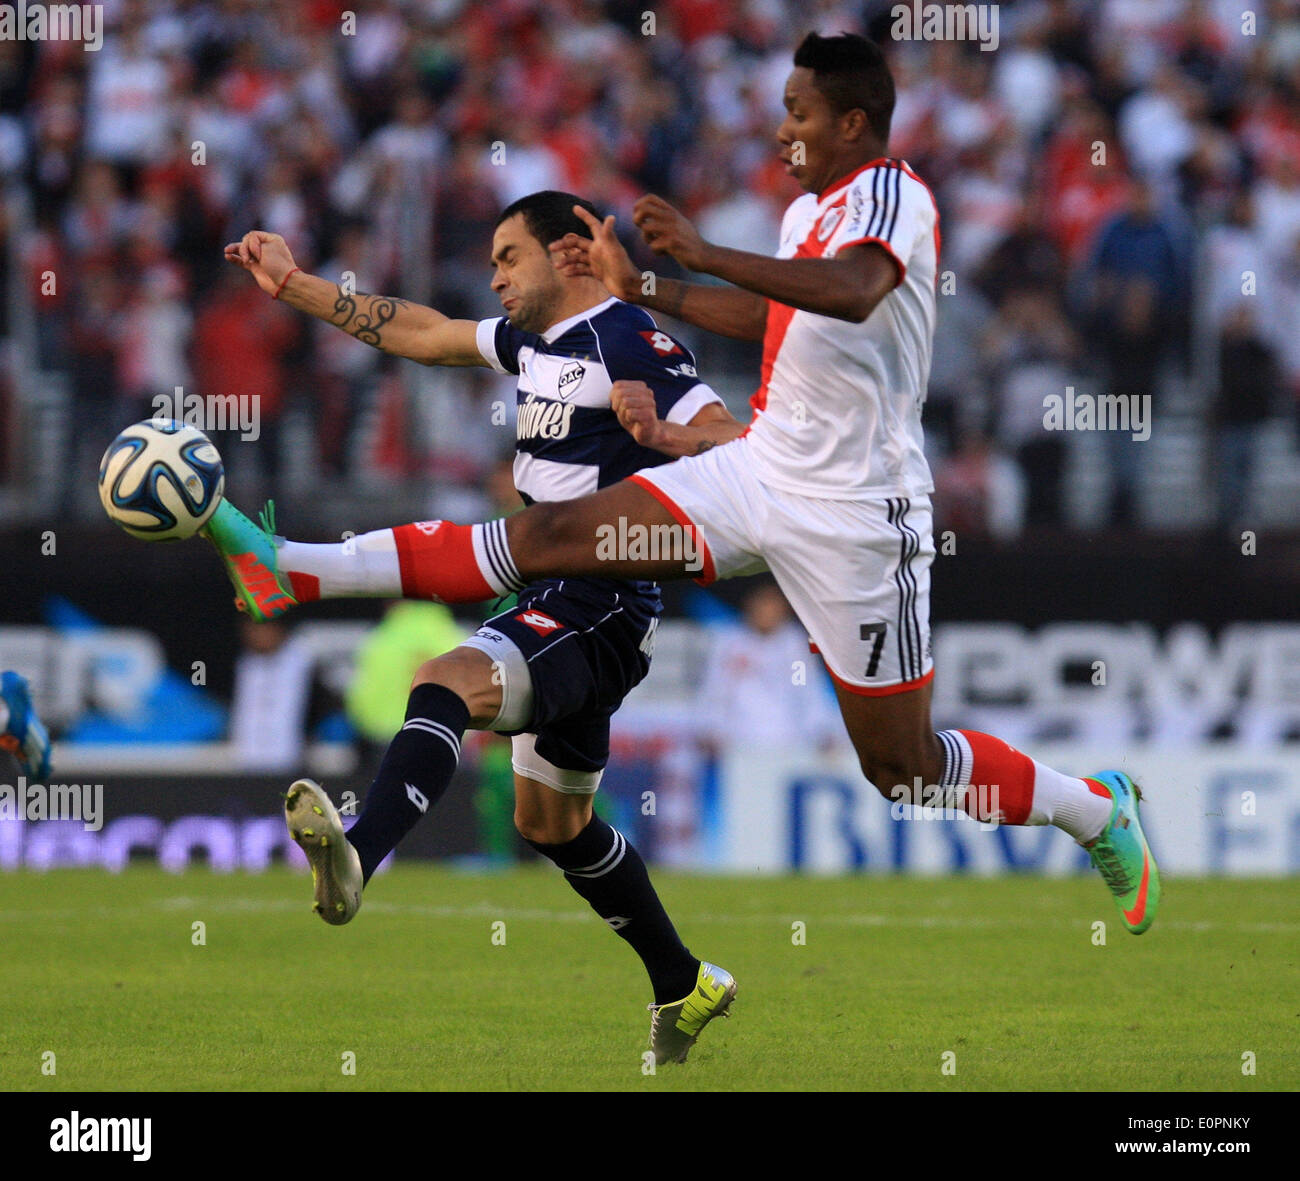 (140519) -- BUENOS AIRES, May 19, 2014 (Xinhua) -- Carlos Carbonero (R) of River Plate vies the ball with Fernando Telechea of Quilmes during the Argentine First Division football match in Buenos Aires, capital of Argentina, on May 18, 2014. River Plate defeated Quilmes by 5-0 and won the tournament. (Xinhua/Martin Zabala) (jp) (ah) Stock Photo